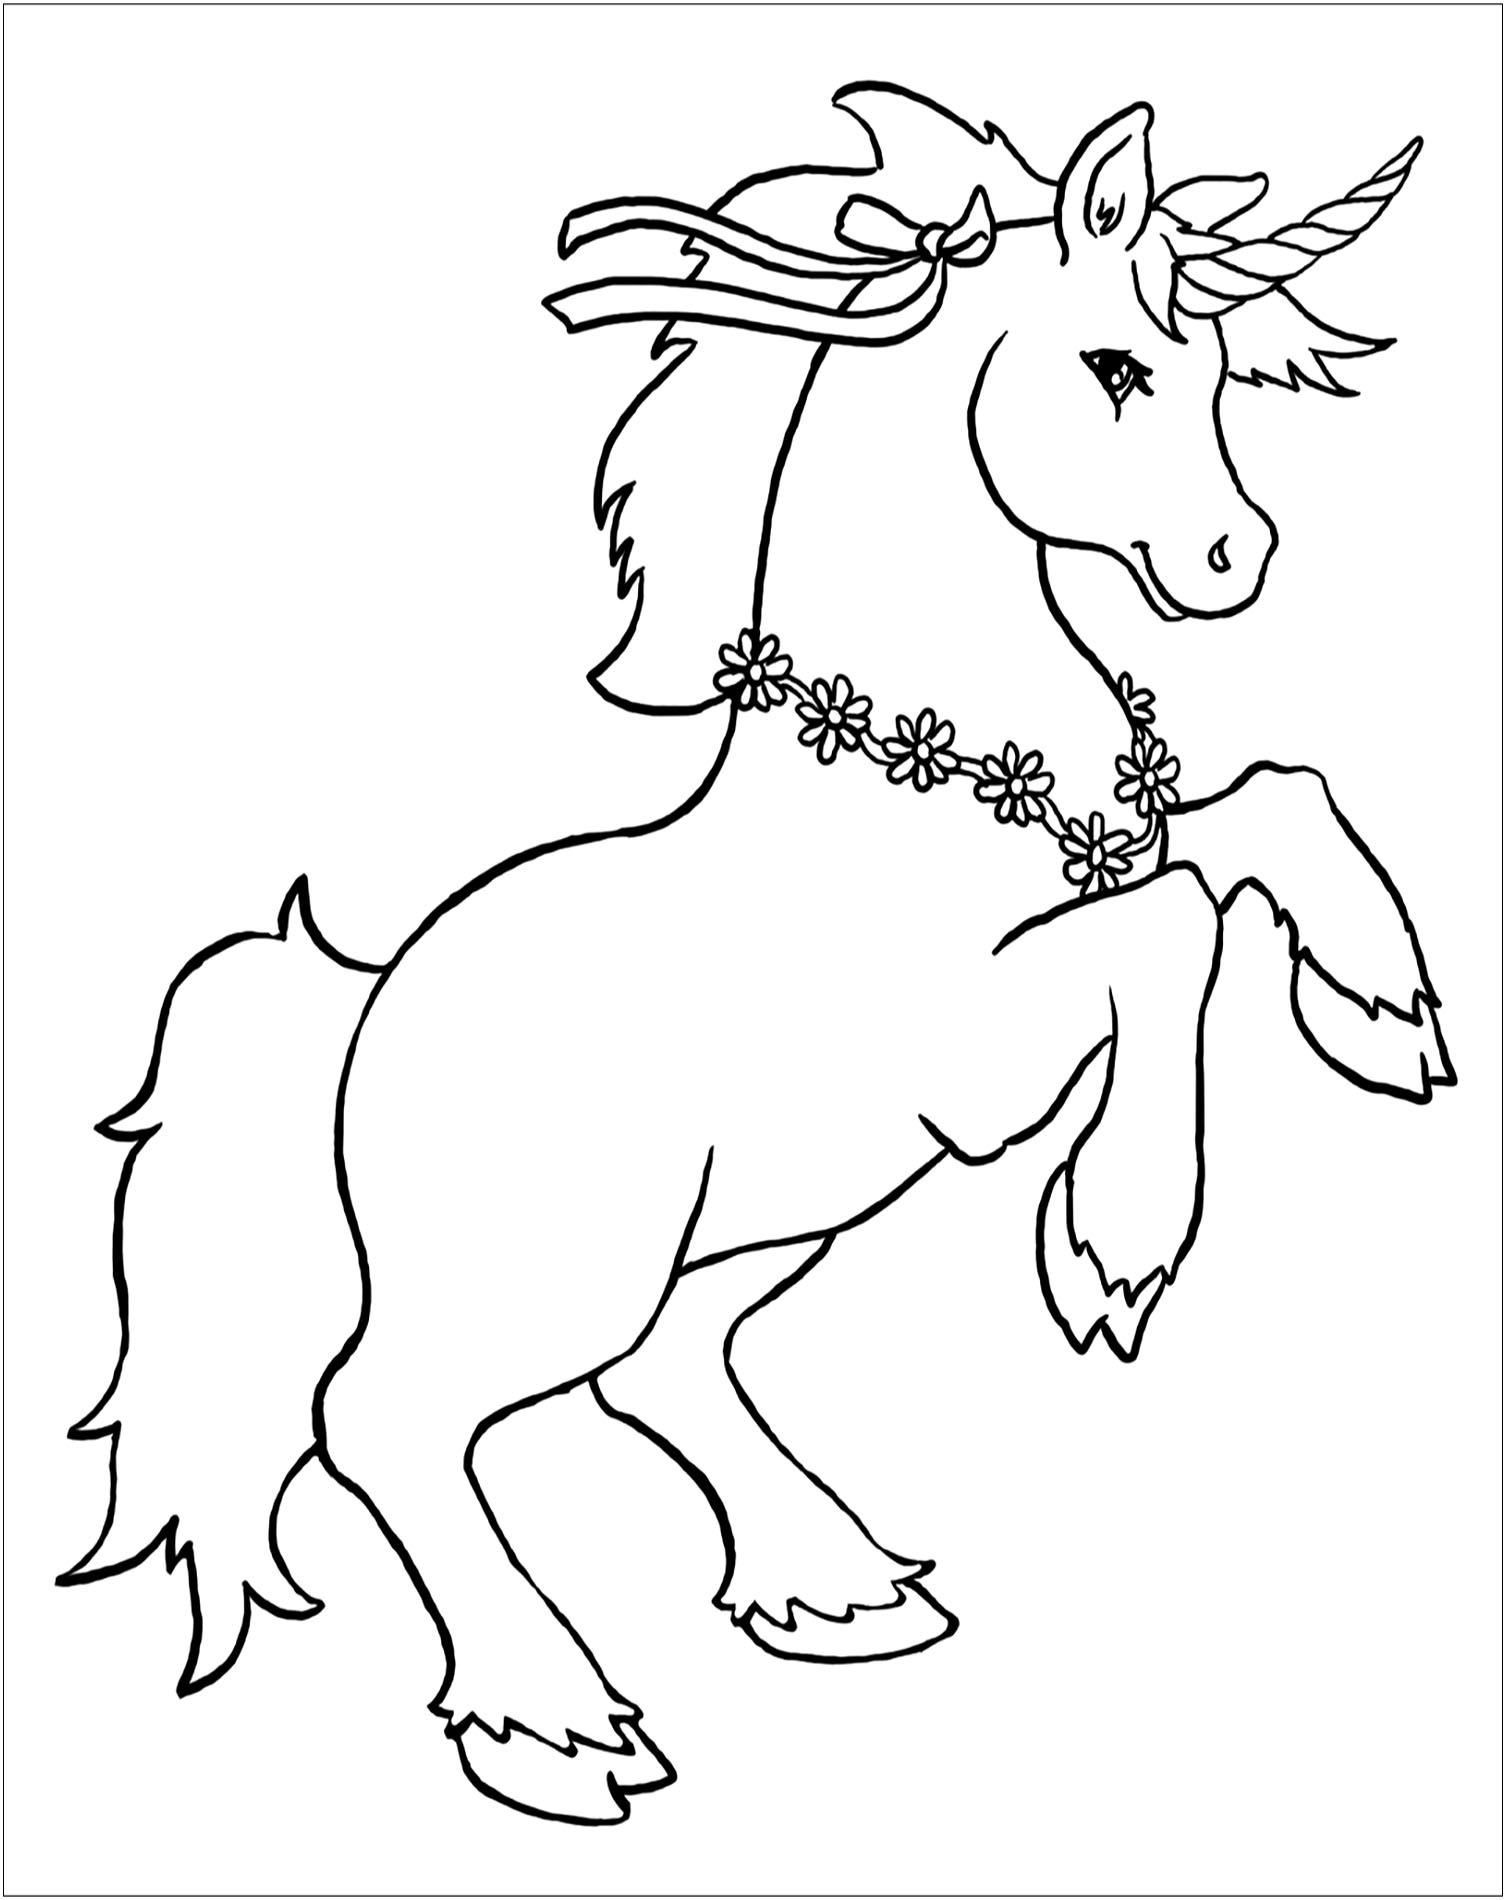 Free unicorn coloring pages to download - Unicorns Kids Coloring Pages